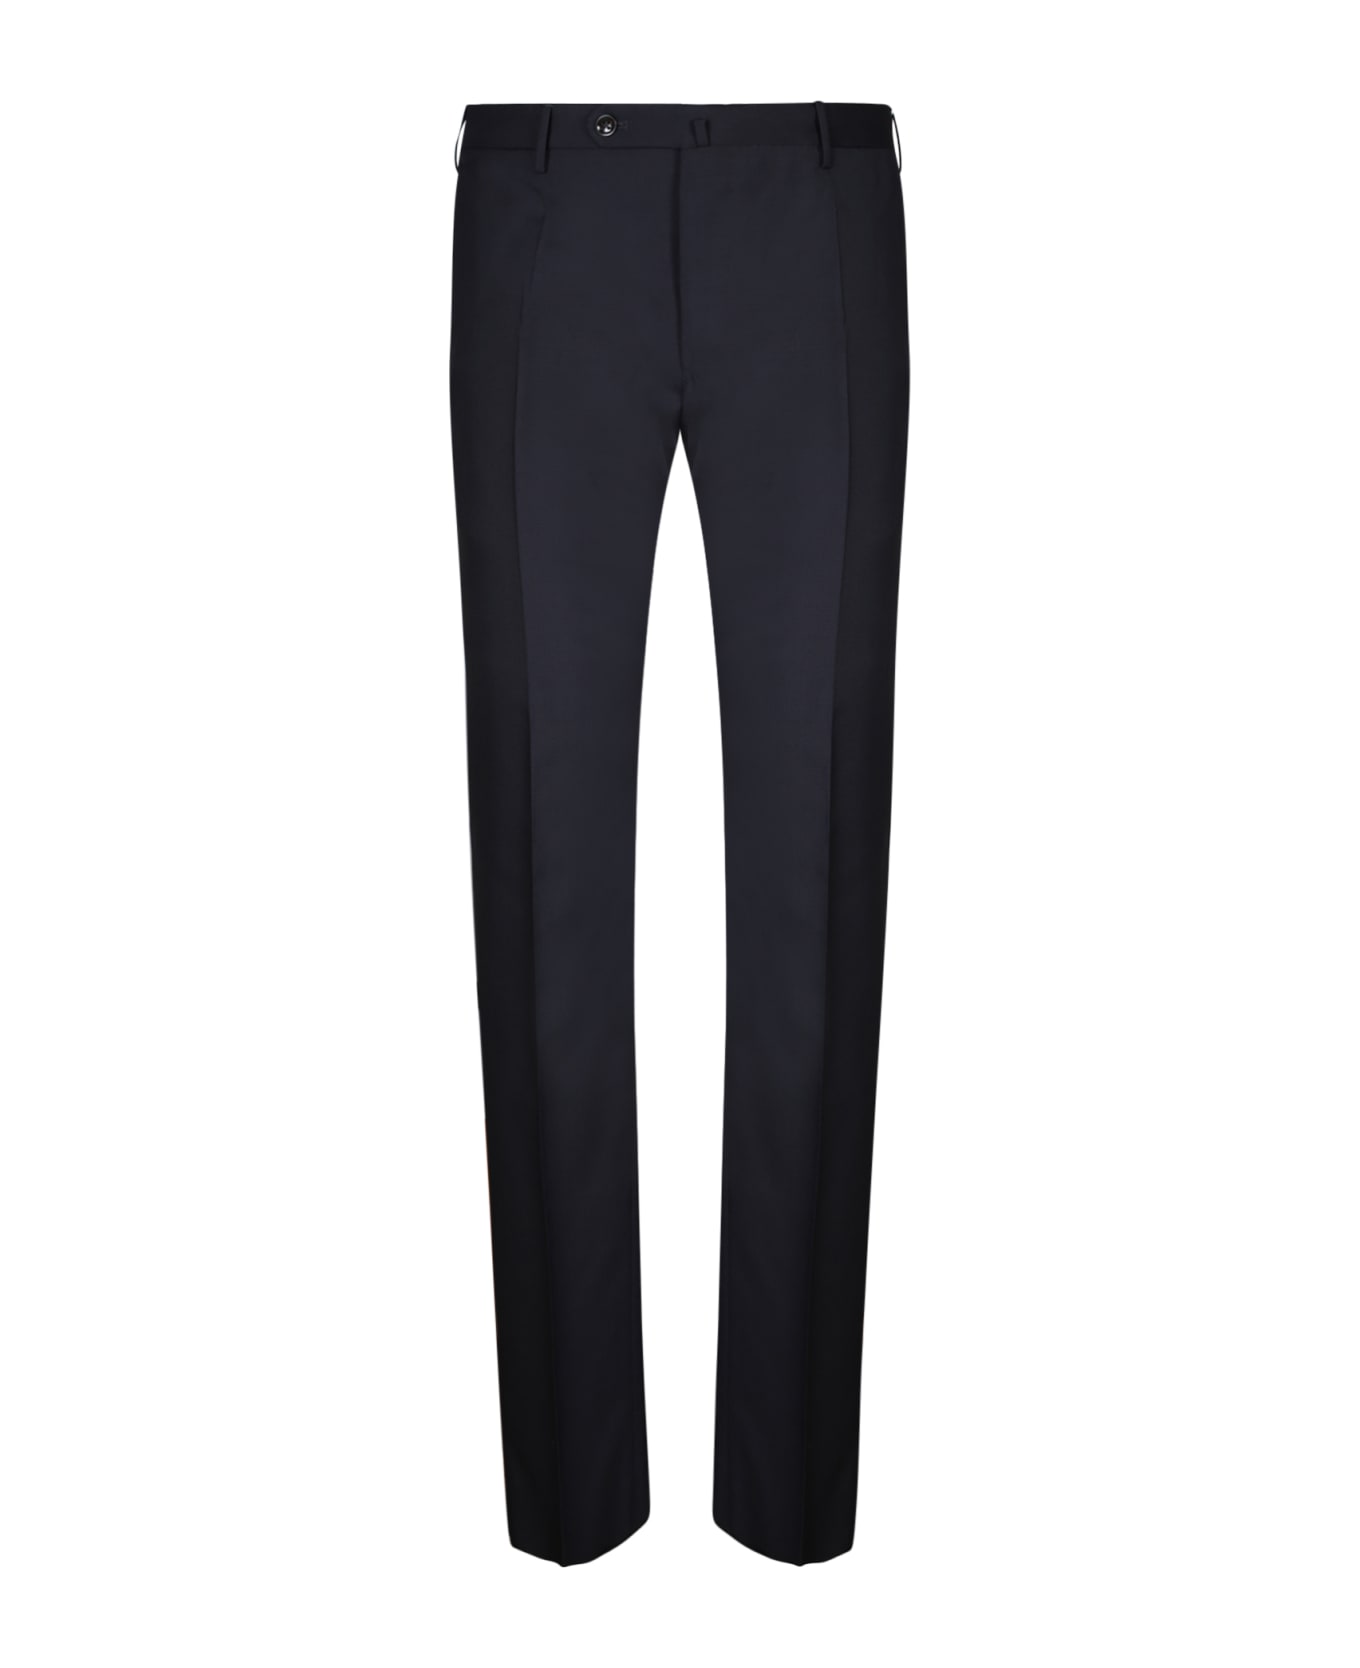 Incotex Blue Tailored Trousers - Blue